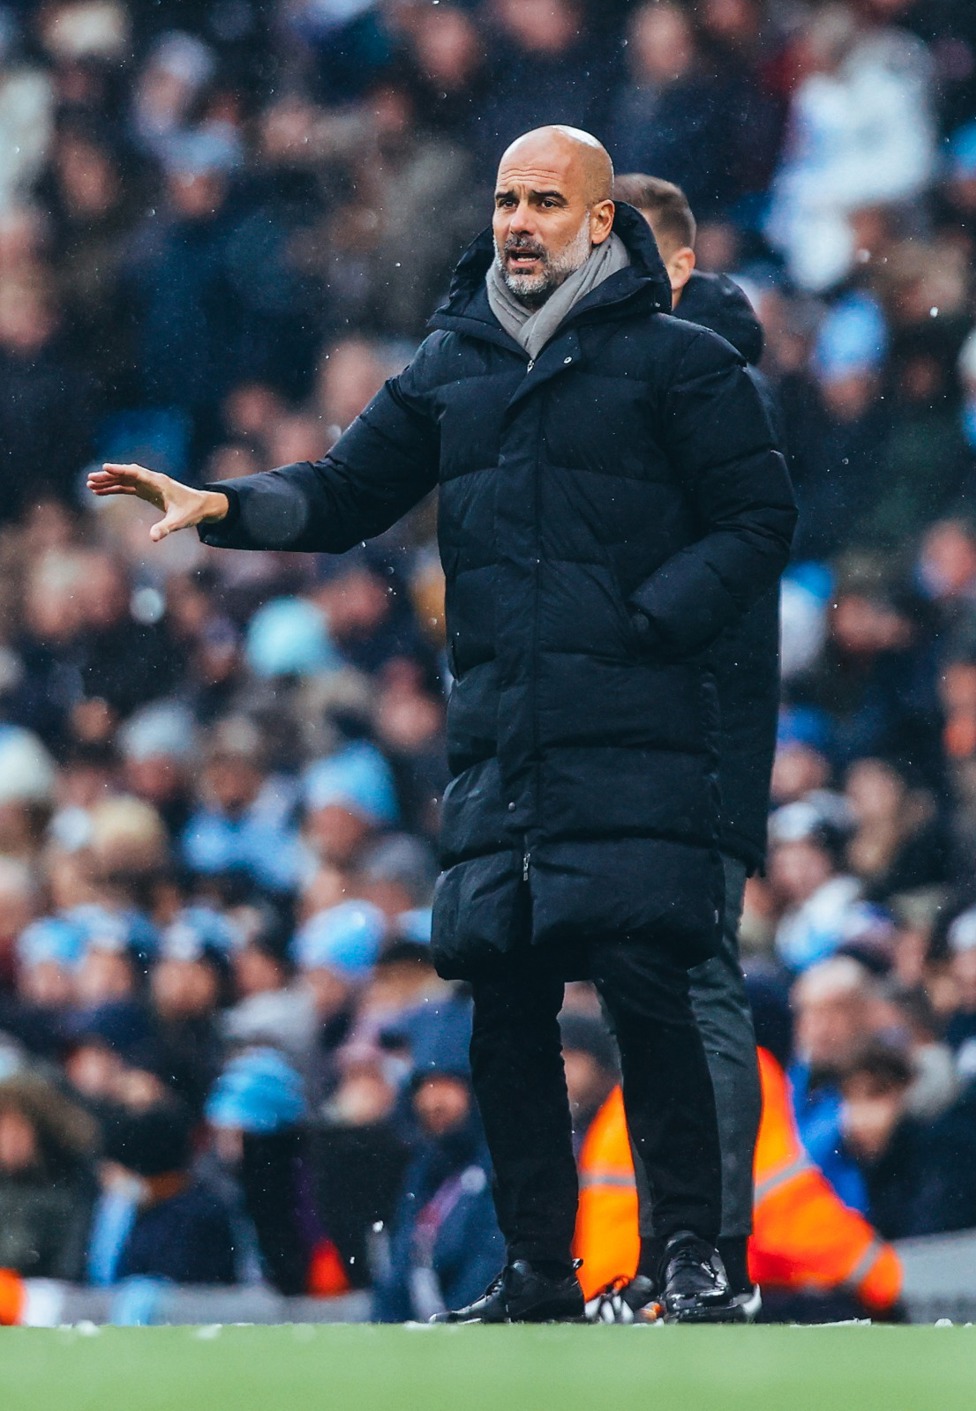 THE BOSS : Guardiola watches on from the touchline.